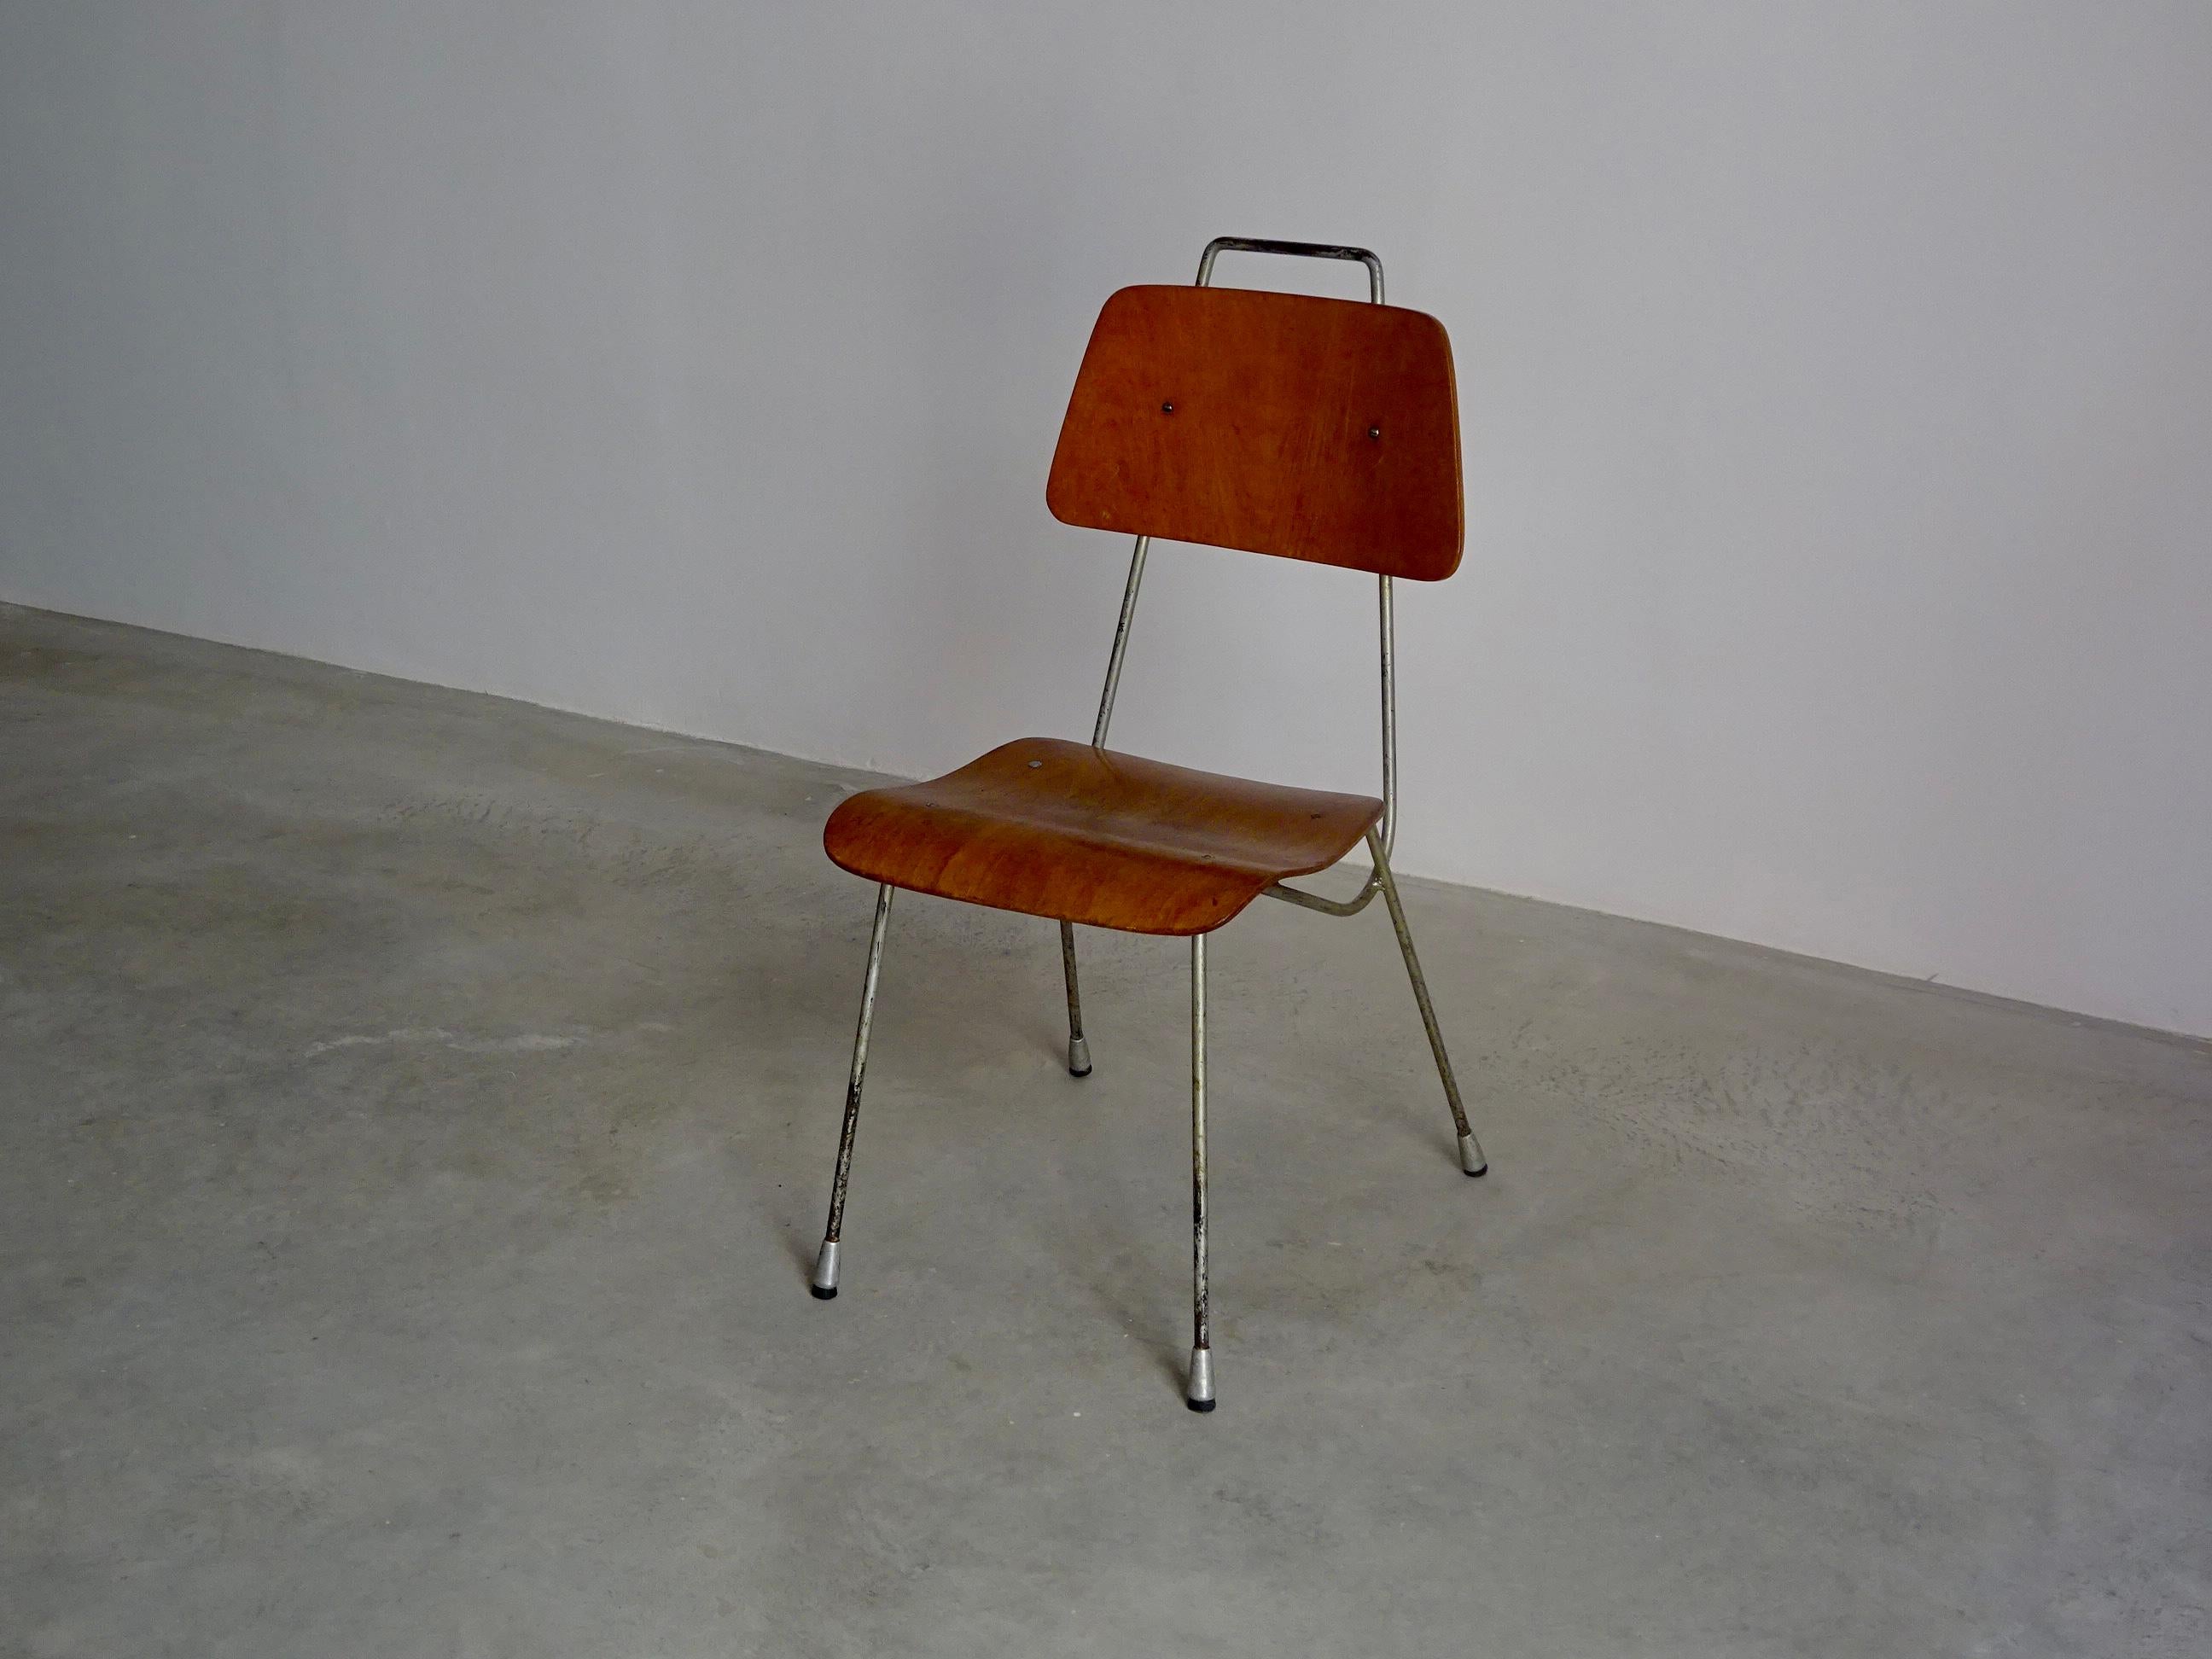 Dinning chair in solid iron and curved plywood designed by Antoni de Moragas i Gallissà, member of “Grup R”, the Catalan rationalist architect’s collective who recovered in 1950s the modernity after Spanish civil war.